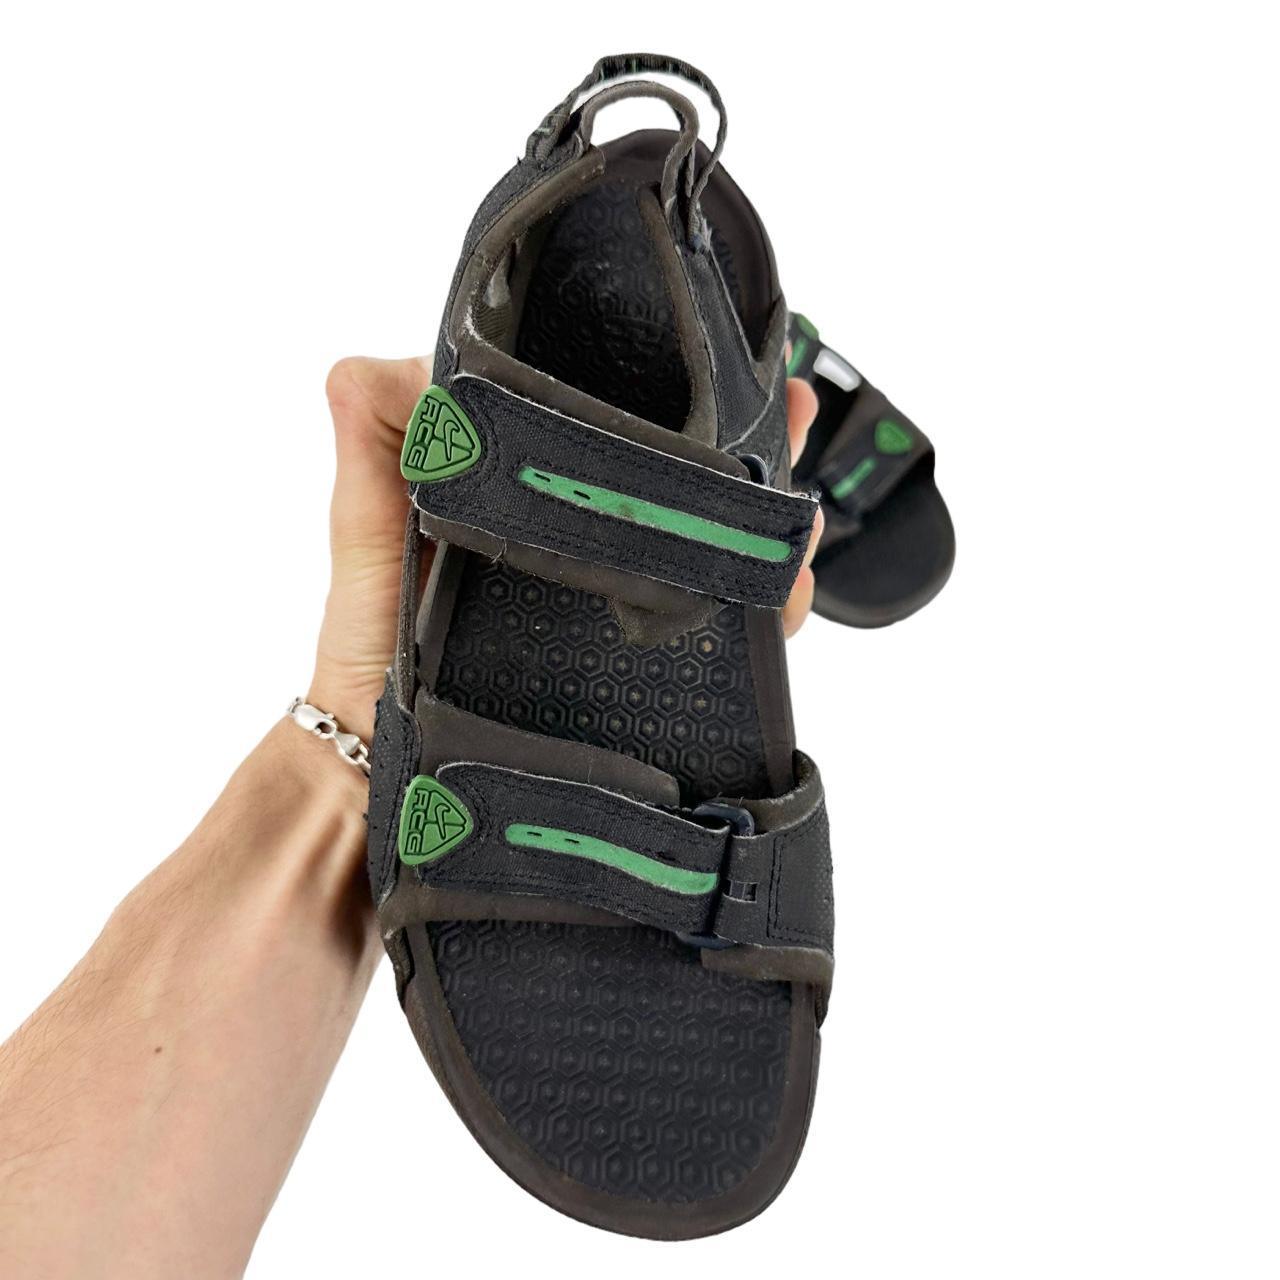 Vintage Nike ACG Sandals Size UK 7 - Known Source